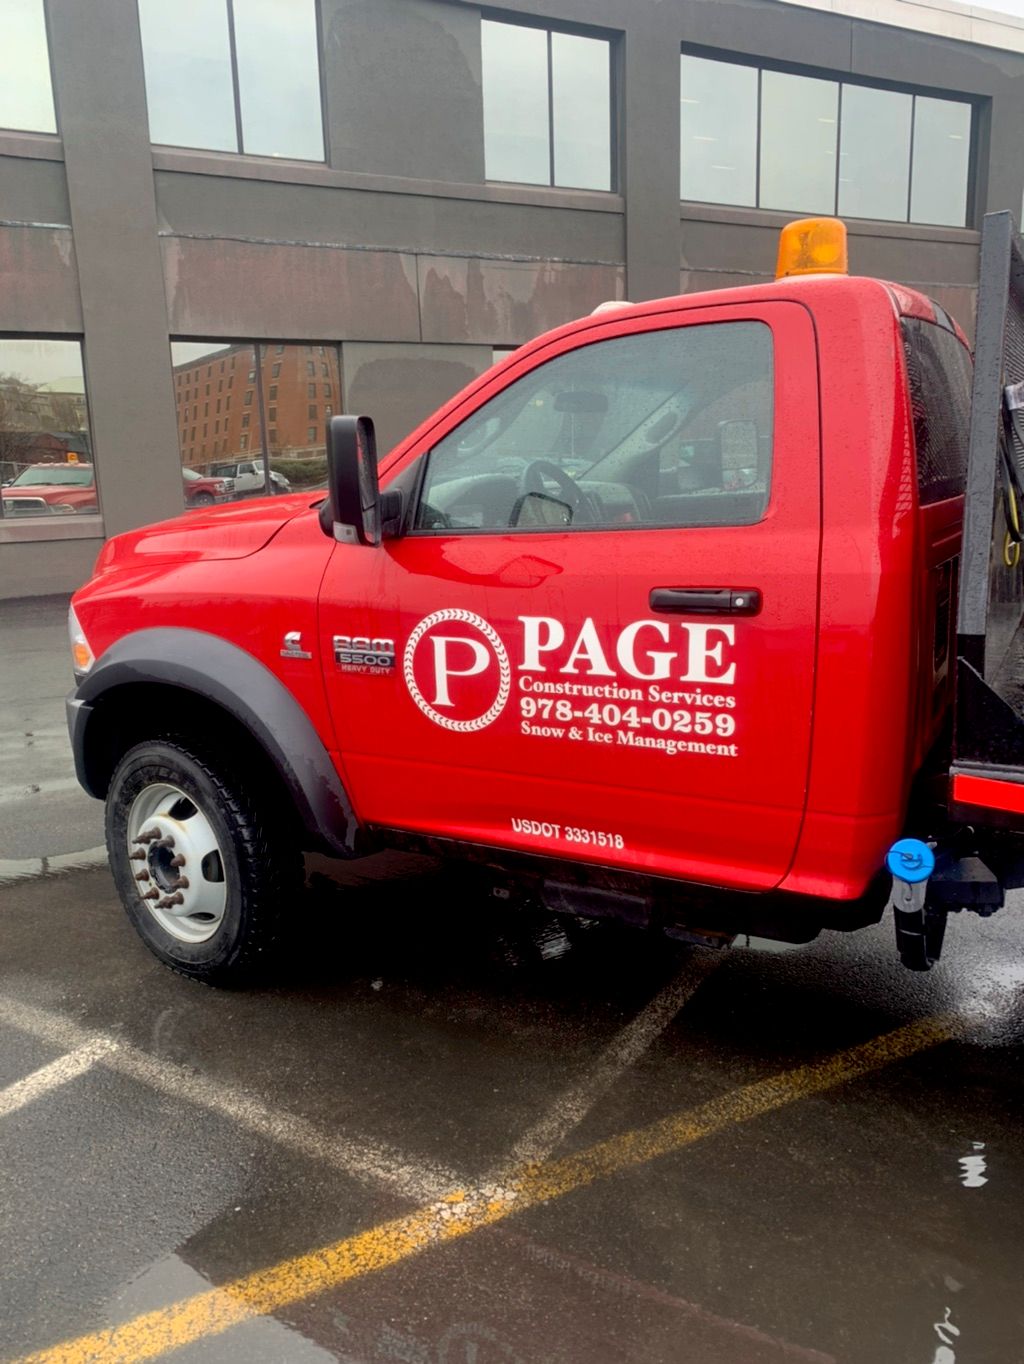 Page Construction Services